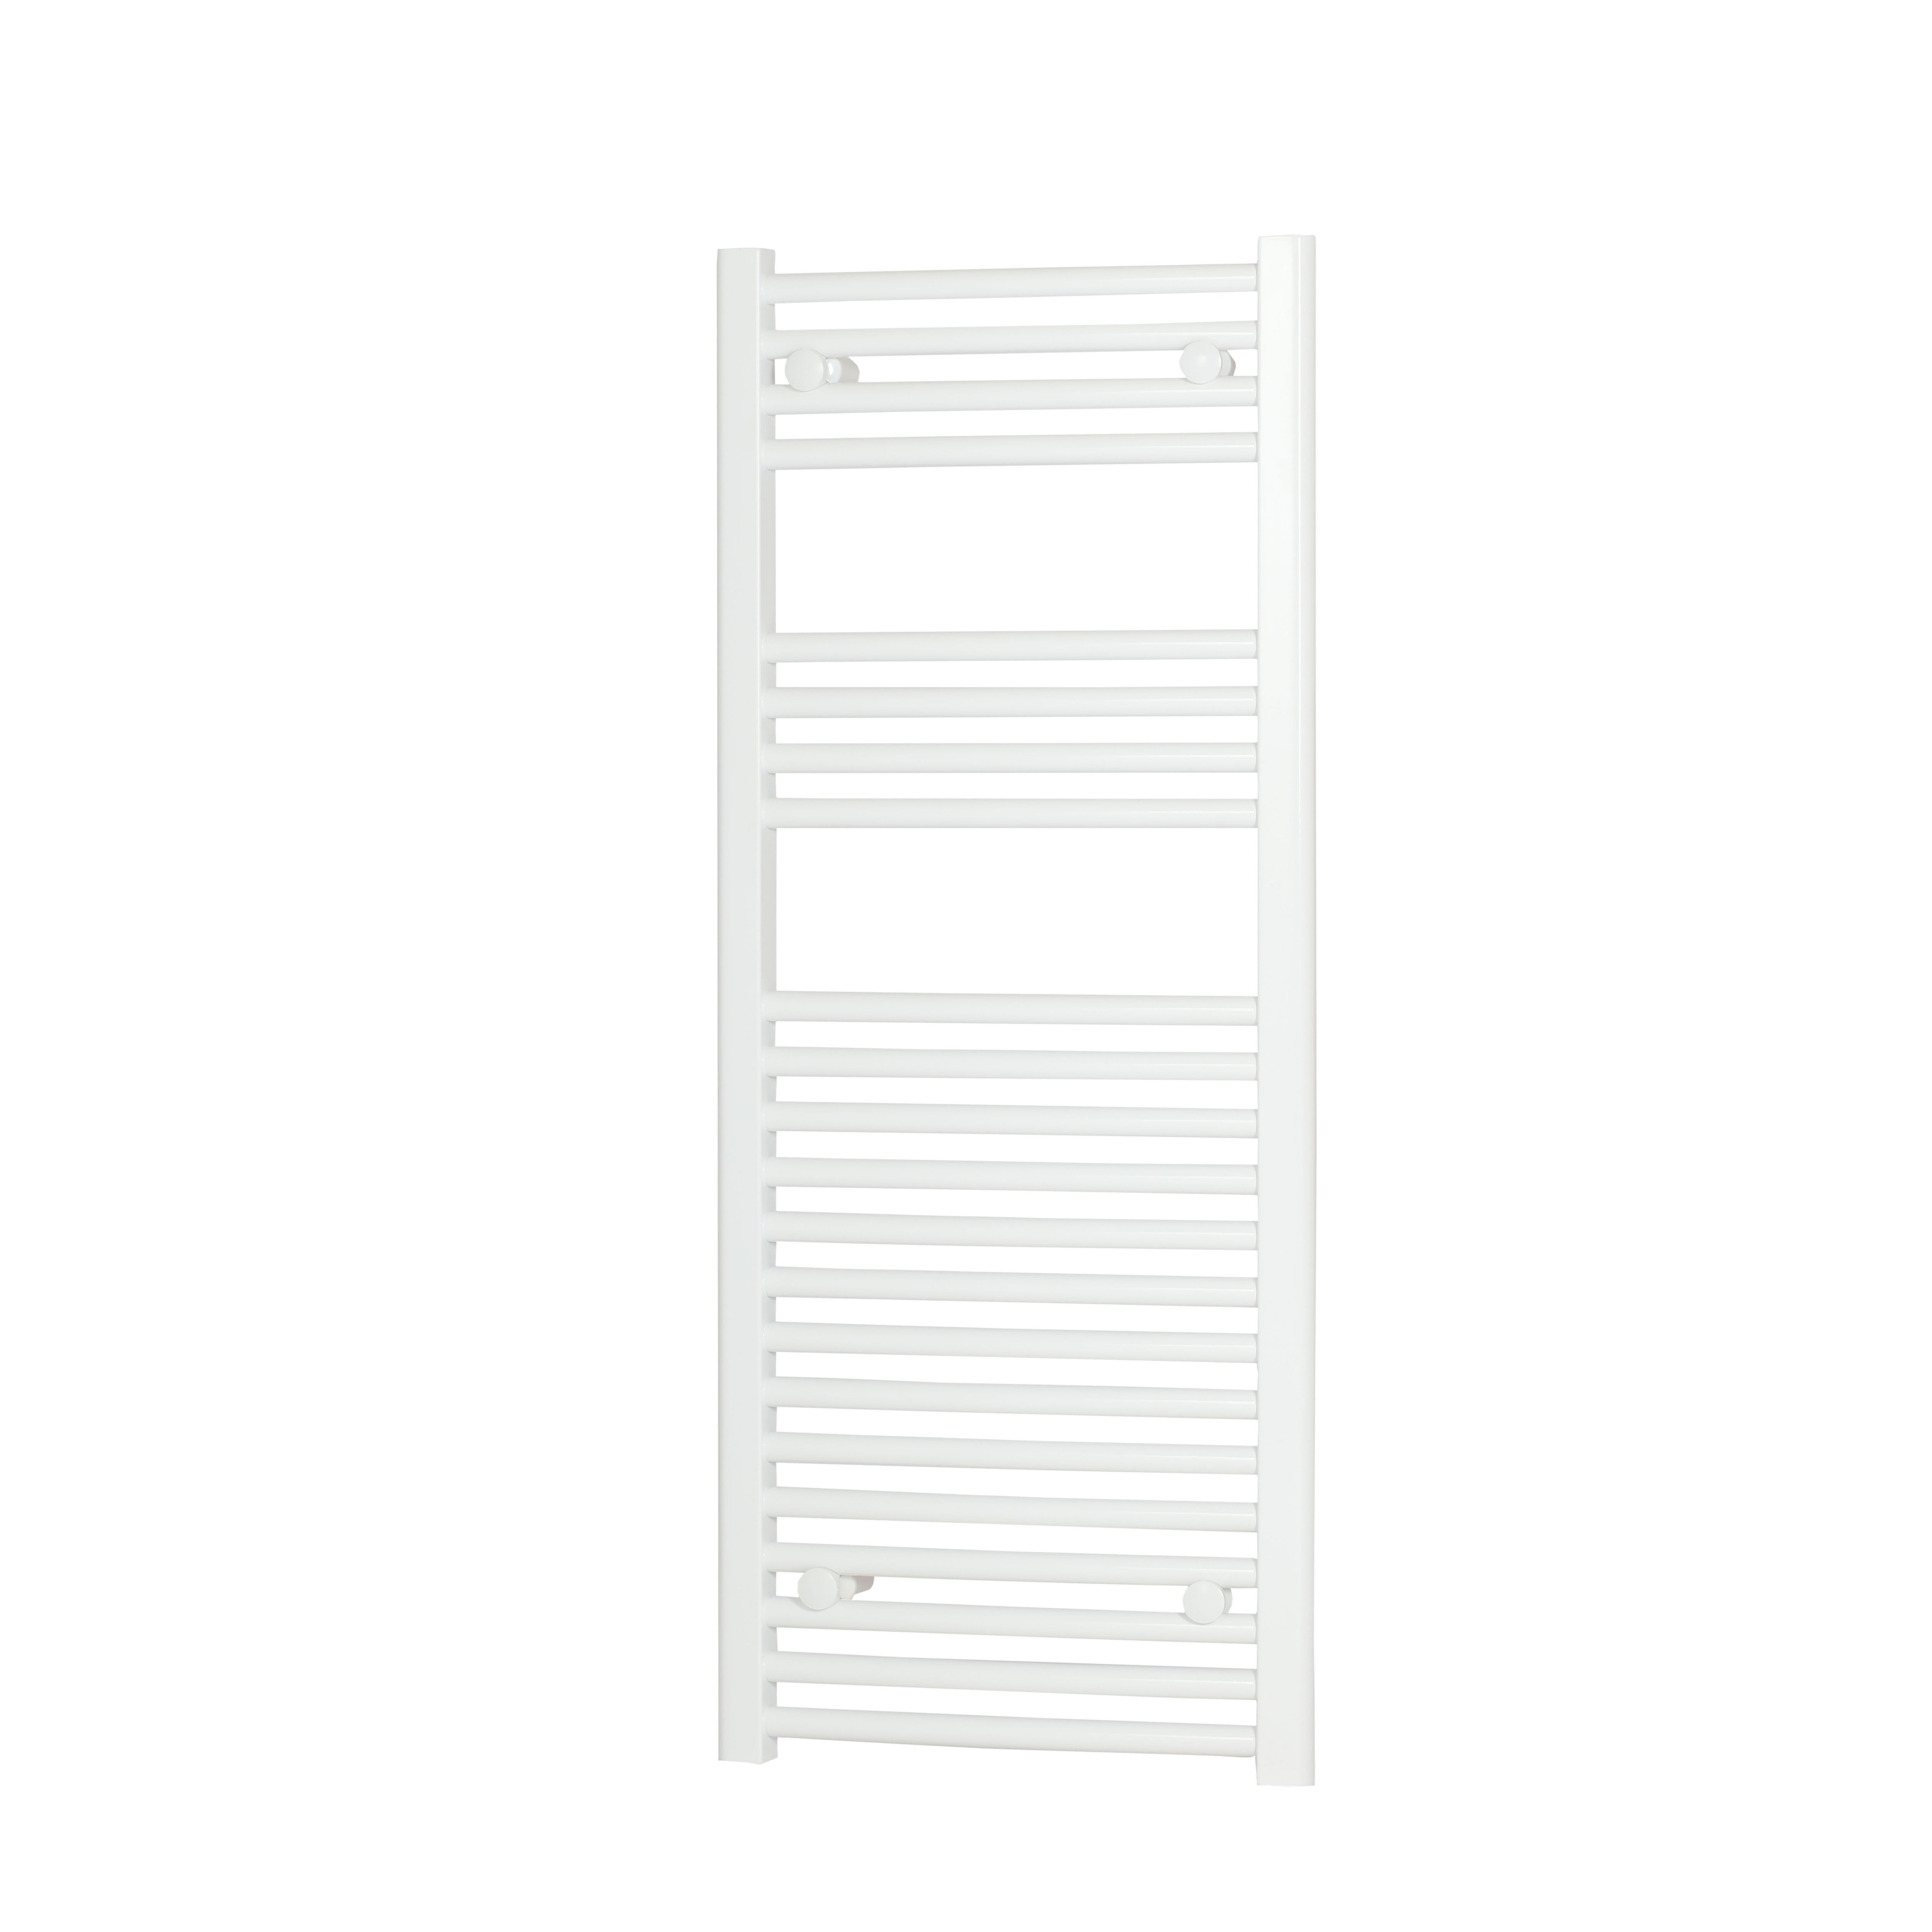 Flomasta Curved, White Vertical Curved Towel radiator (W)450mm x (H)1100mm